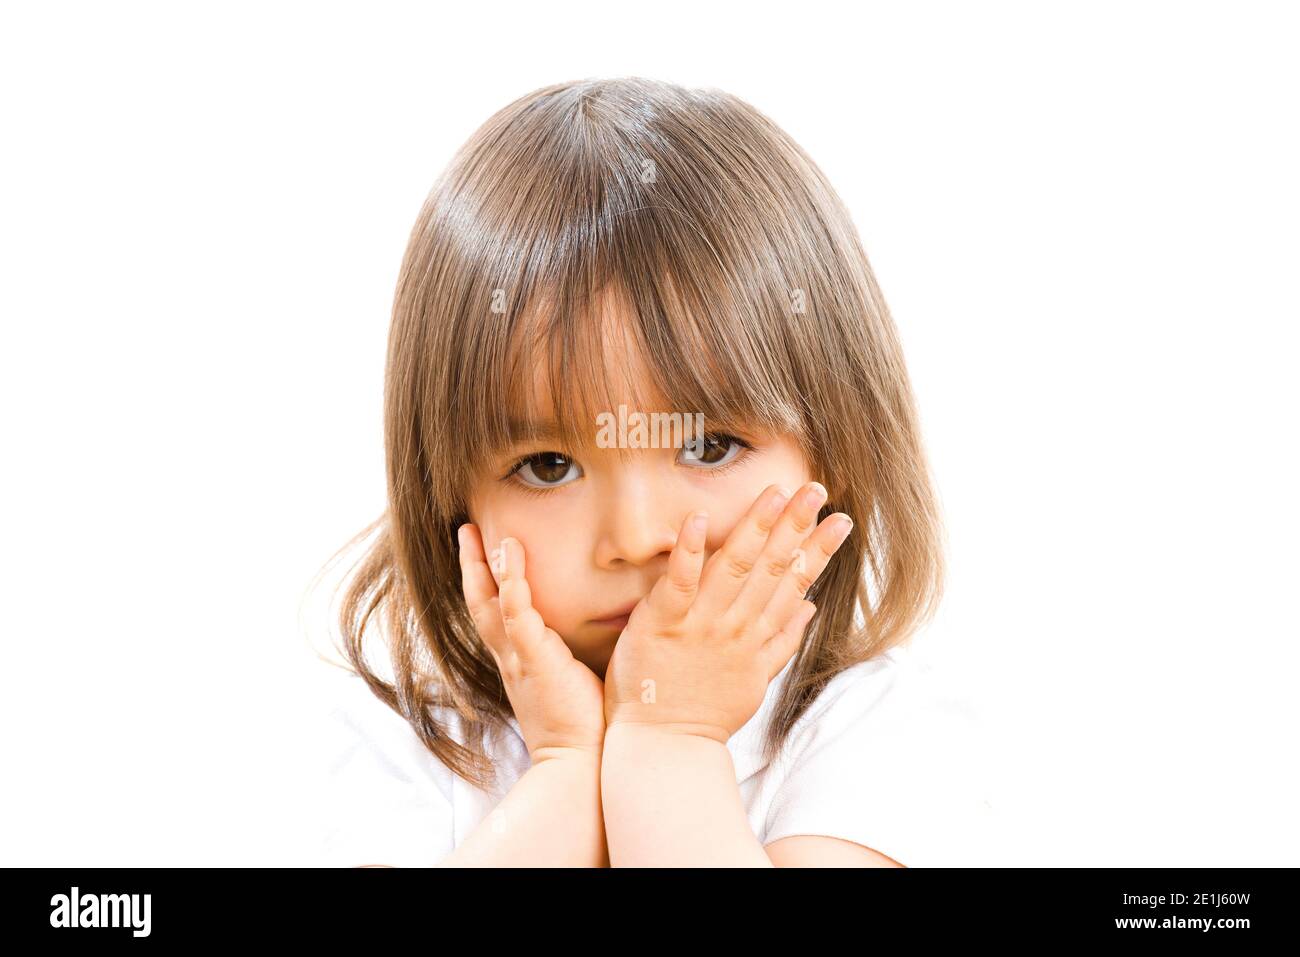 Two years old girl with hands in front the face on white background. Stock Photo